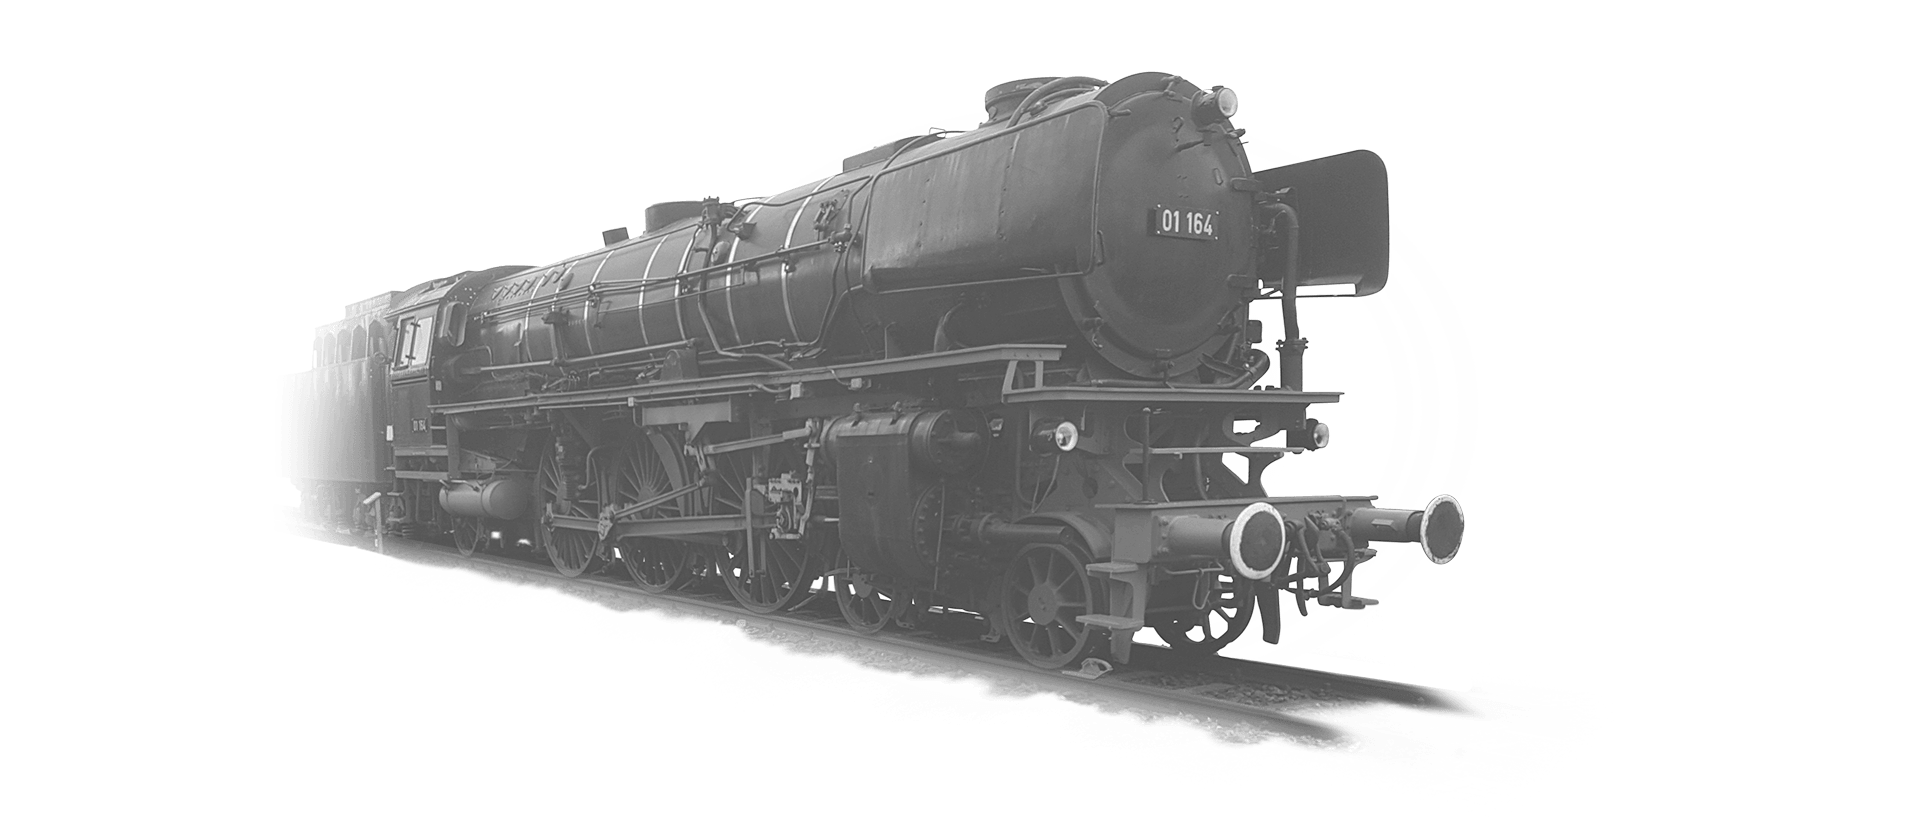 The locomotive 01-164 is coming towards the camera in black and white